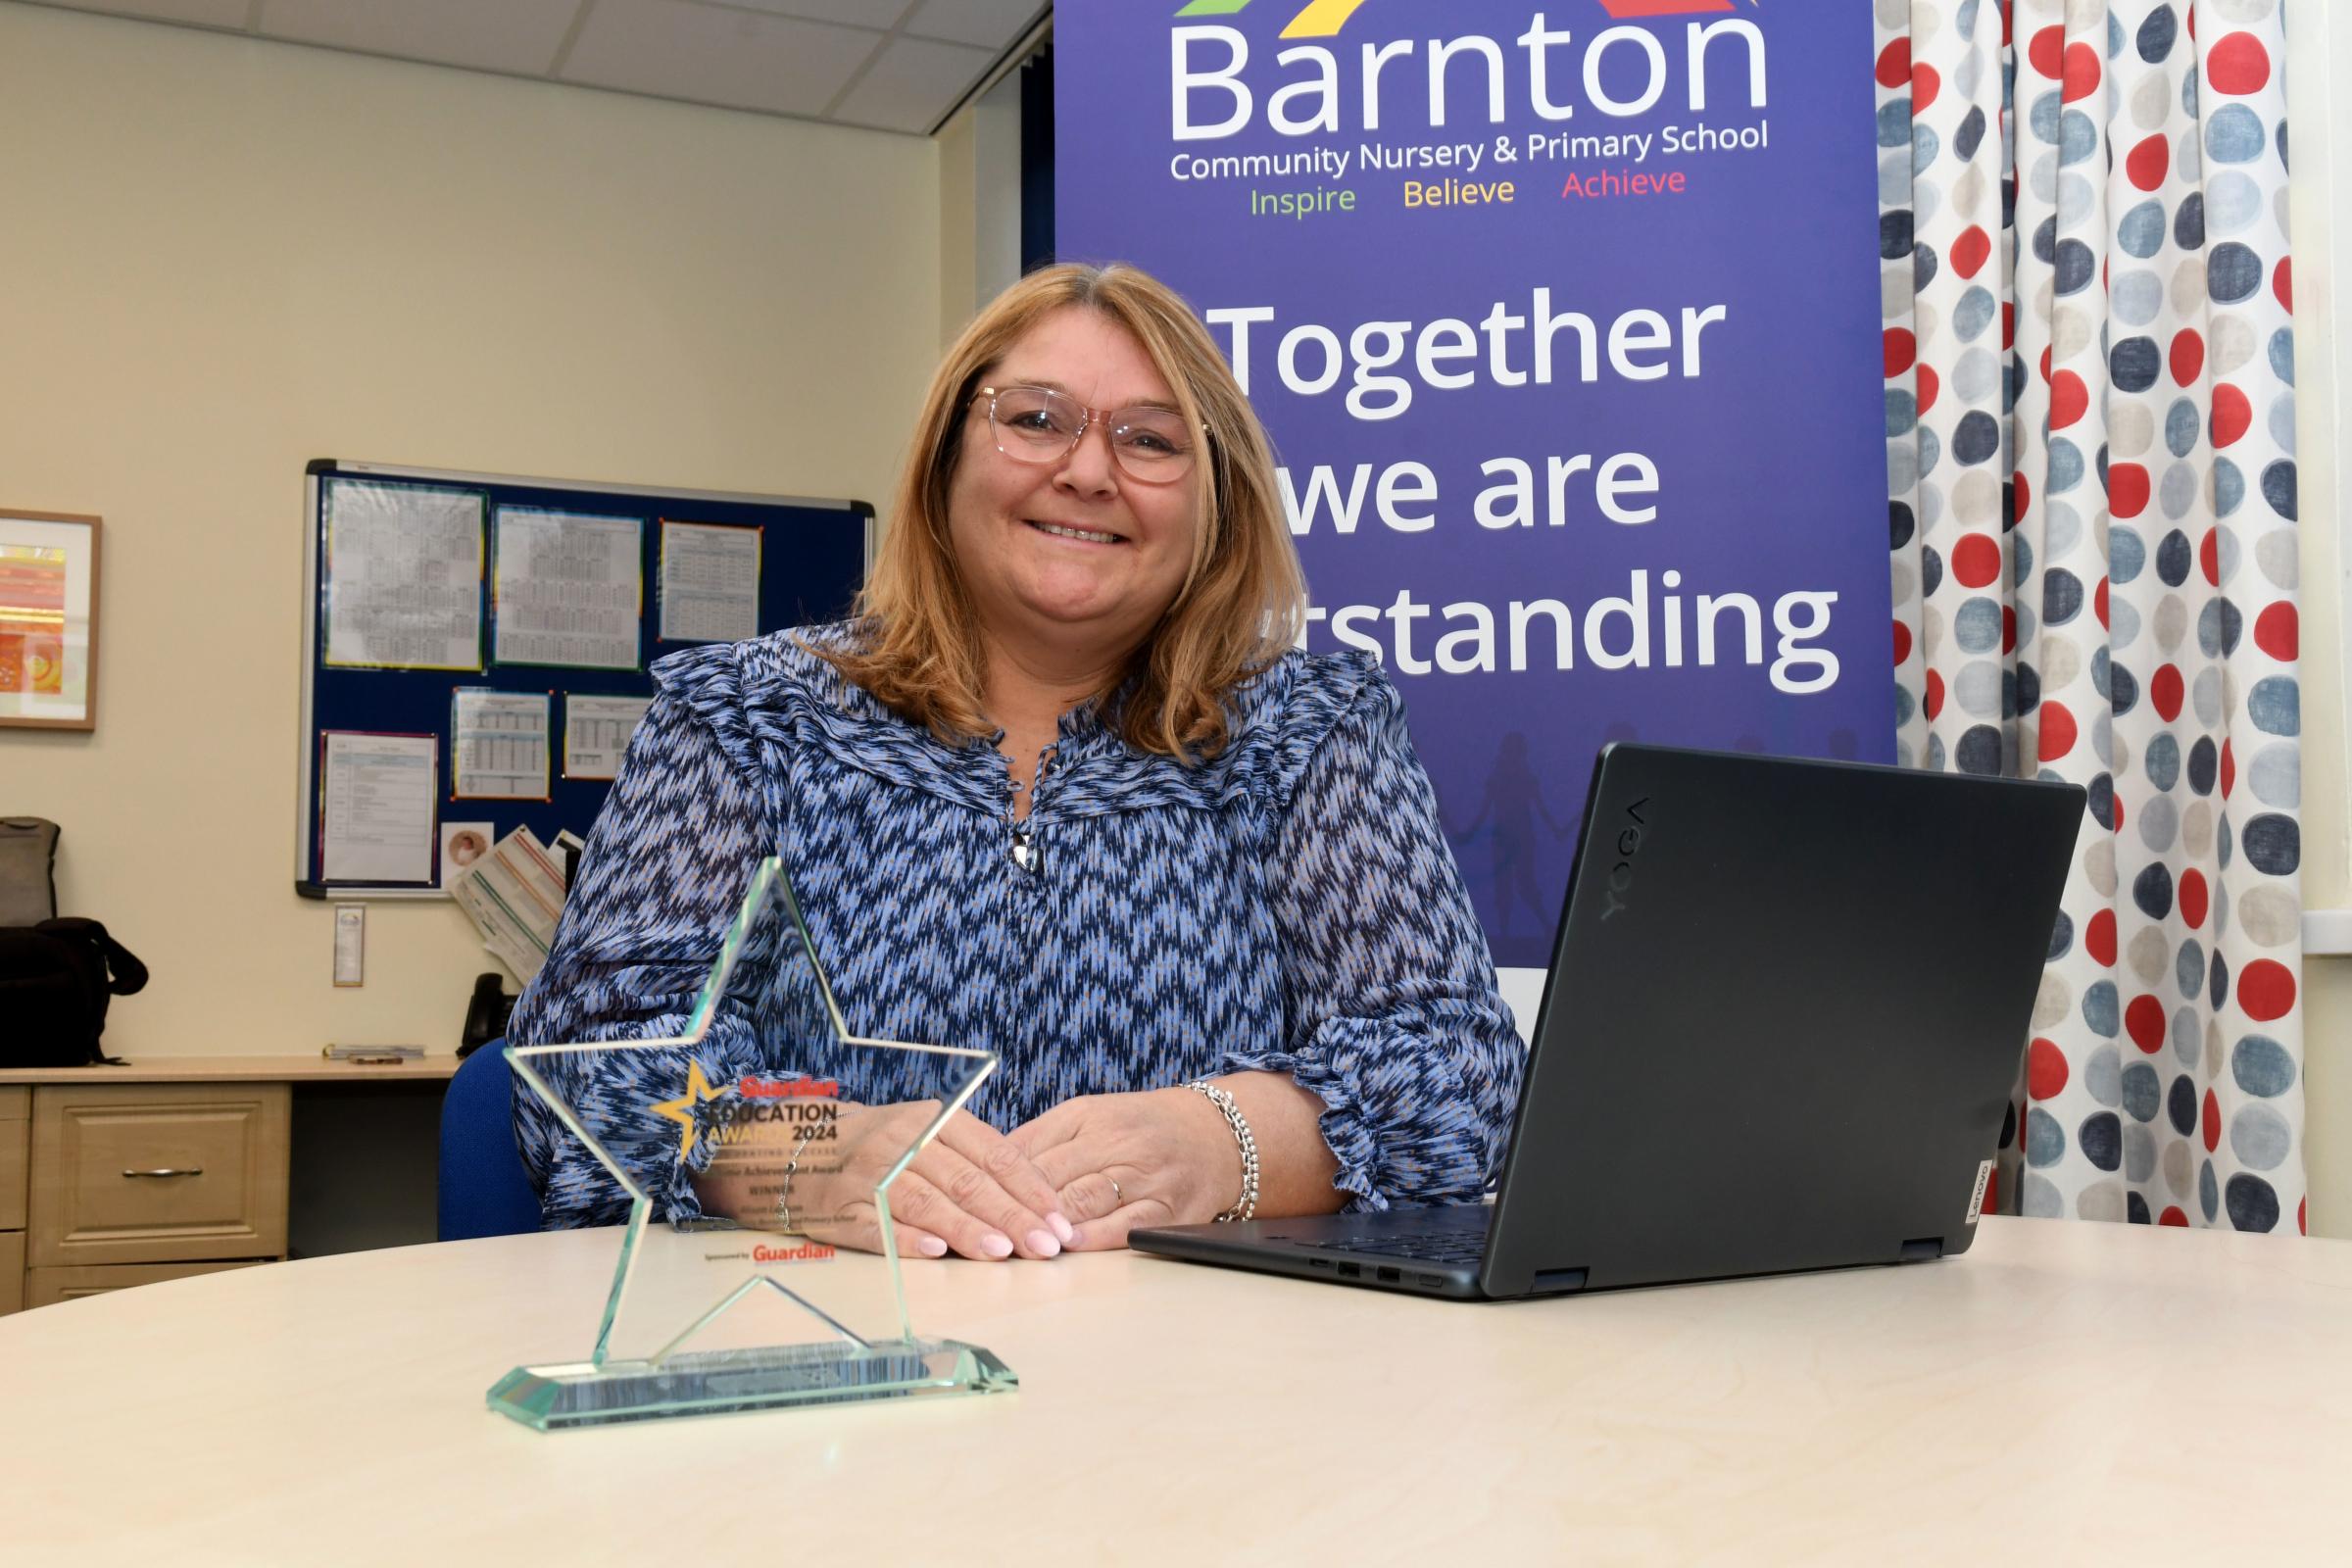 Lifetime Achievement Award winner Alison Lawson has been at Barnton Community Nursery and Primary School for 17 years